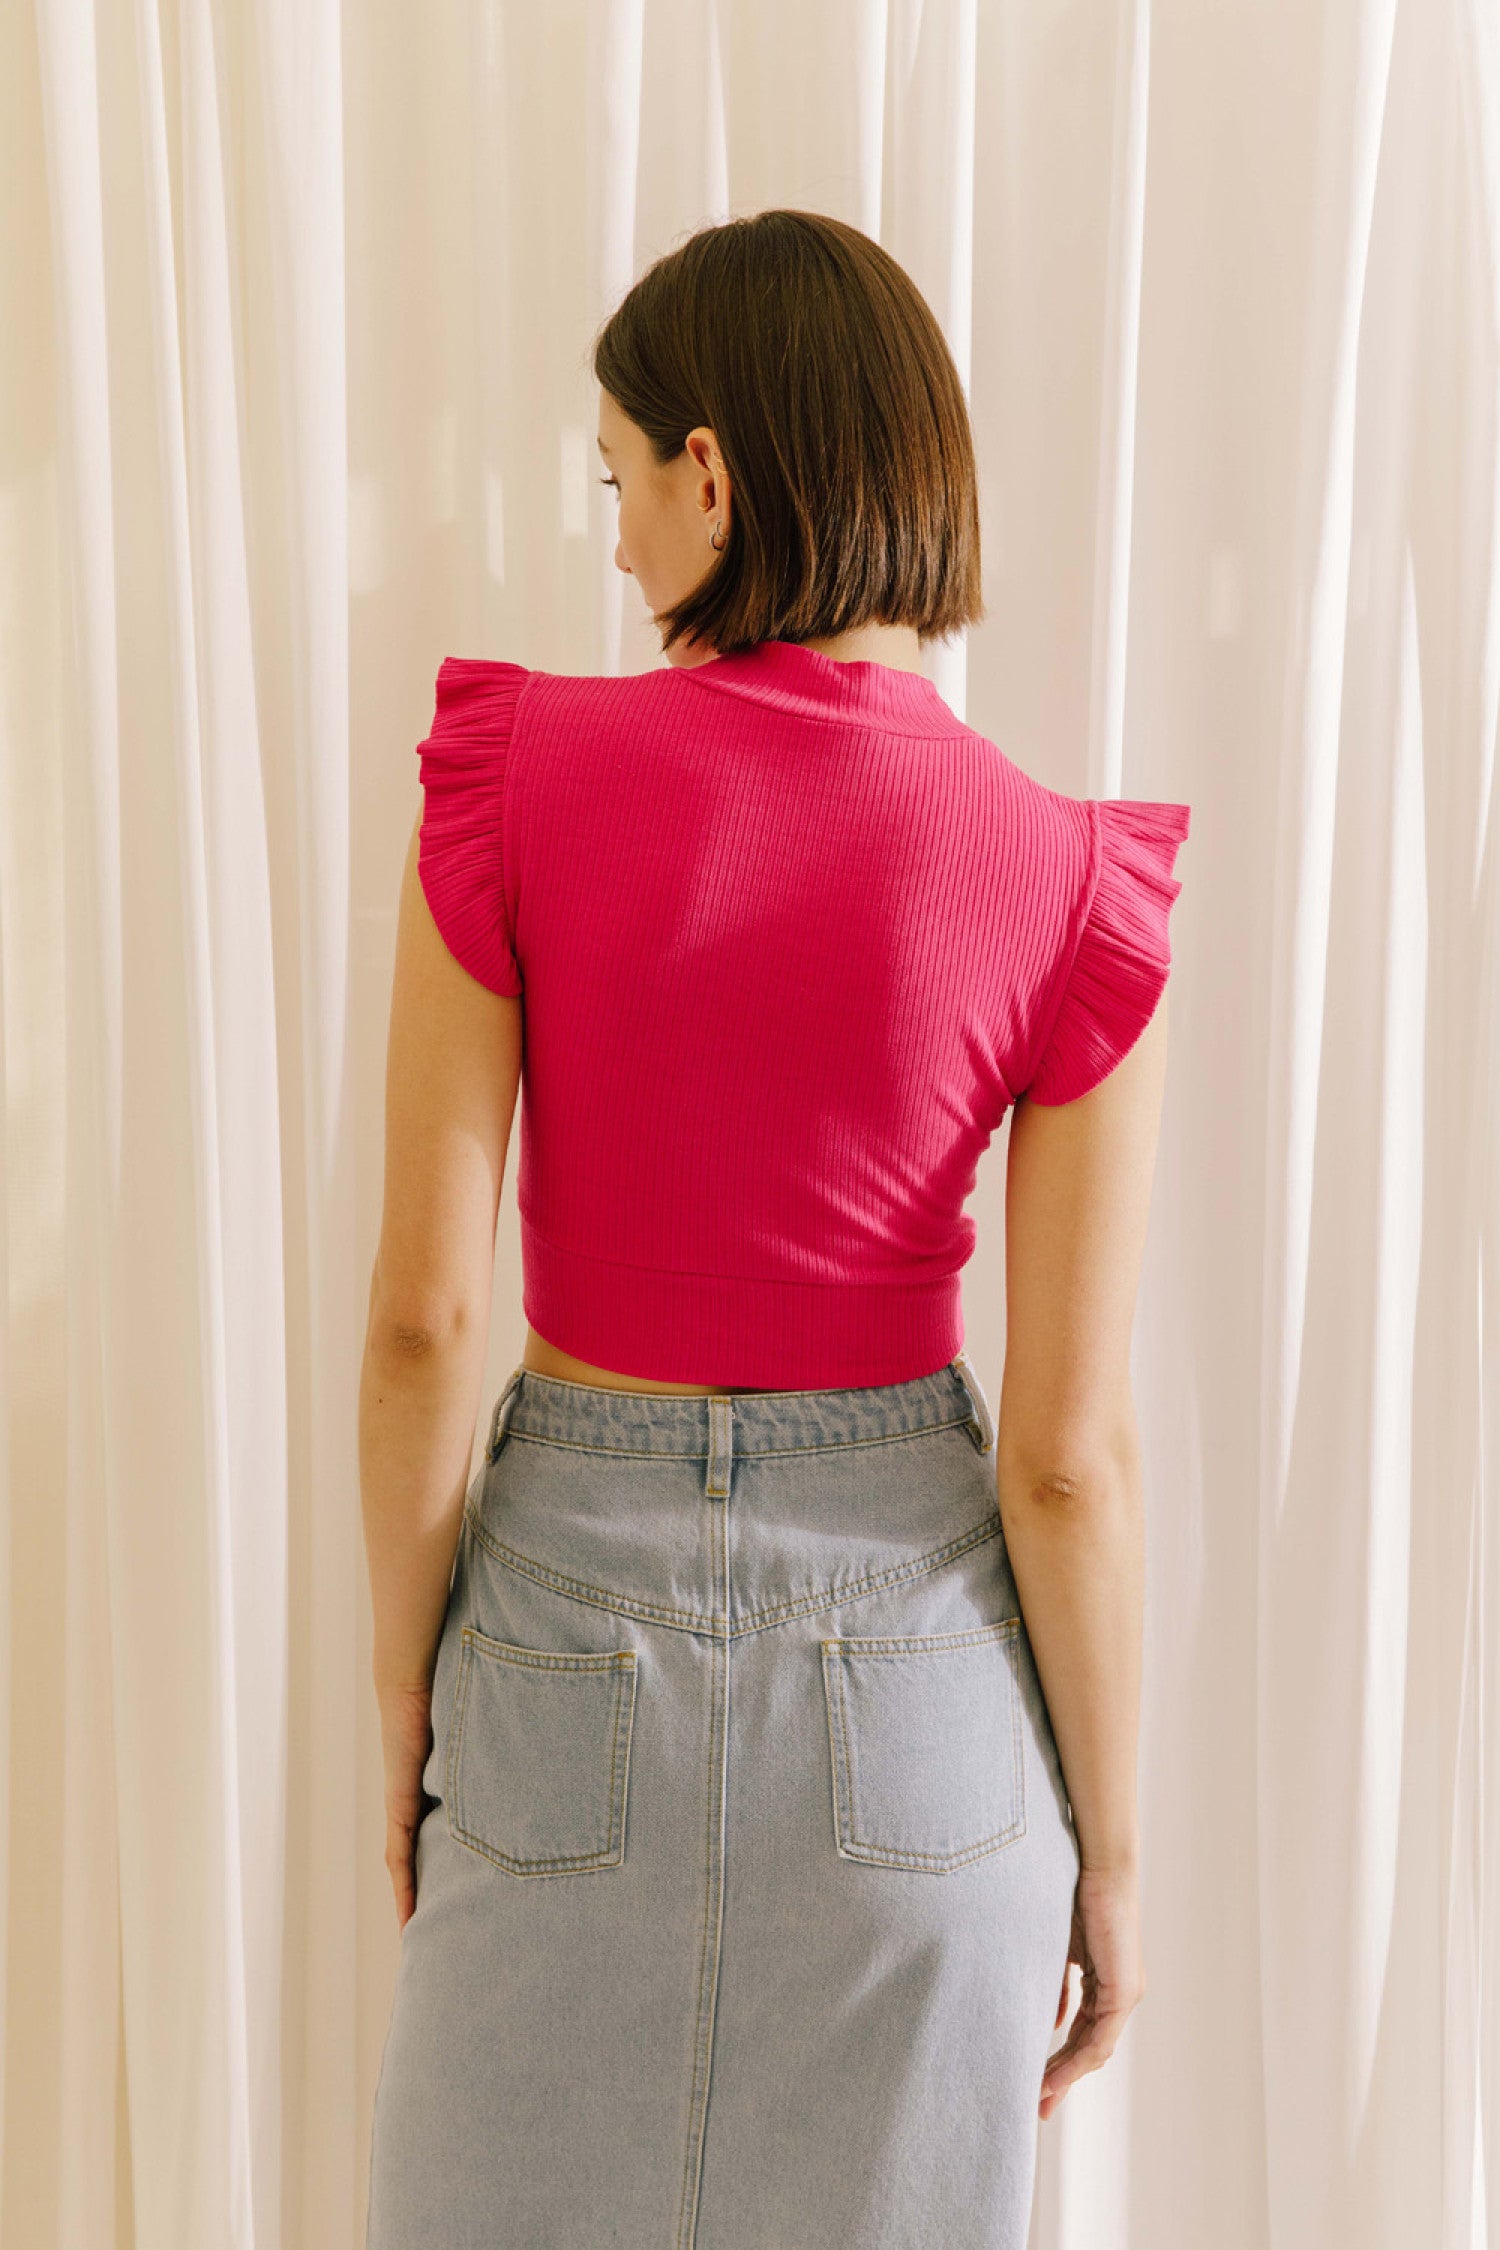 Ribbed knit mock neck crop top in fuchsia featuring ruffle sleeves.  Back view.